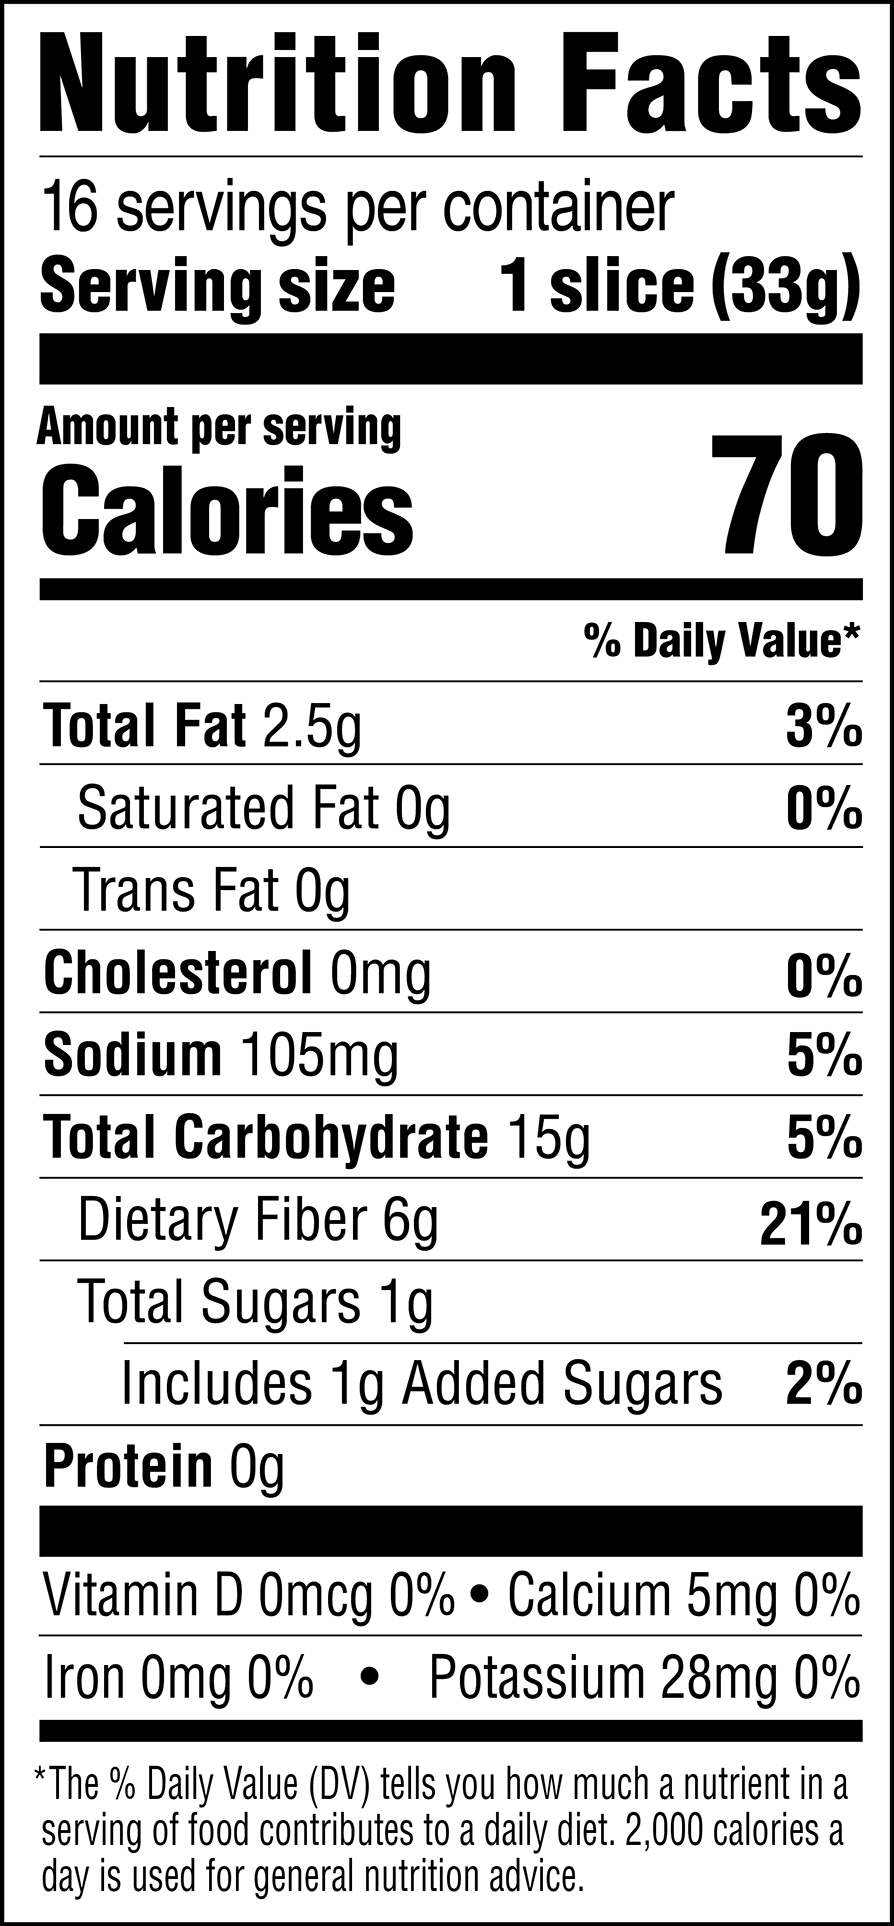 Nutrition Facts Whole Wheatless Bread Usa